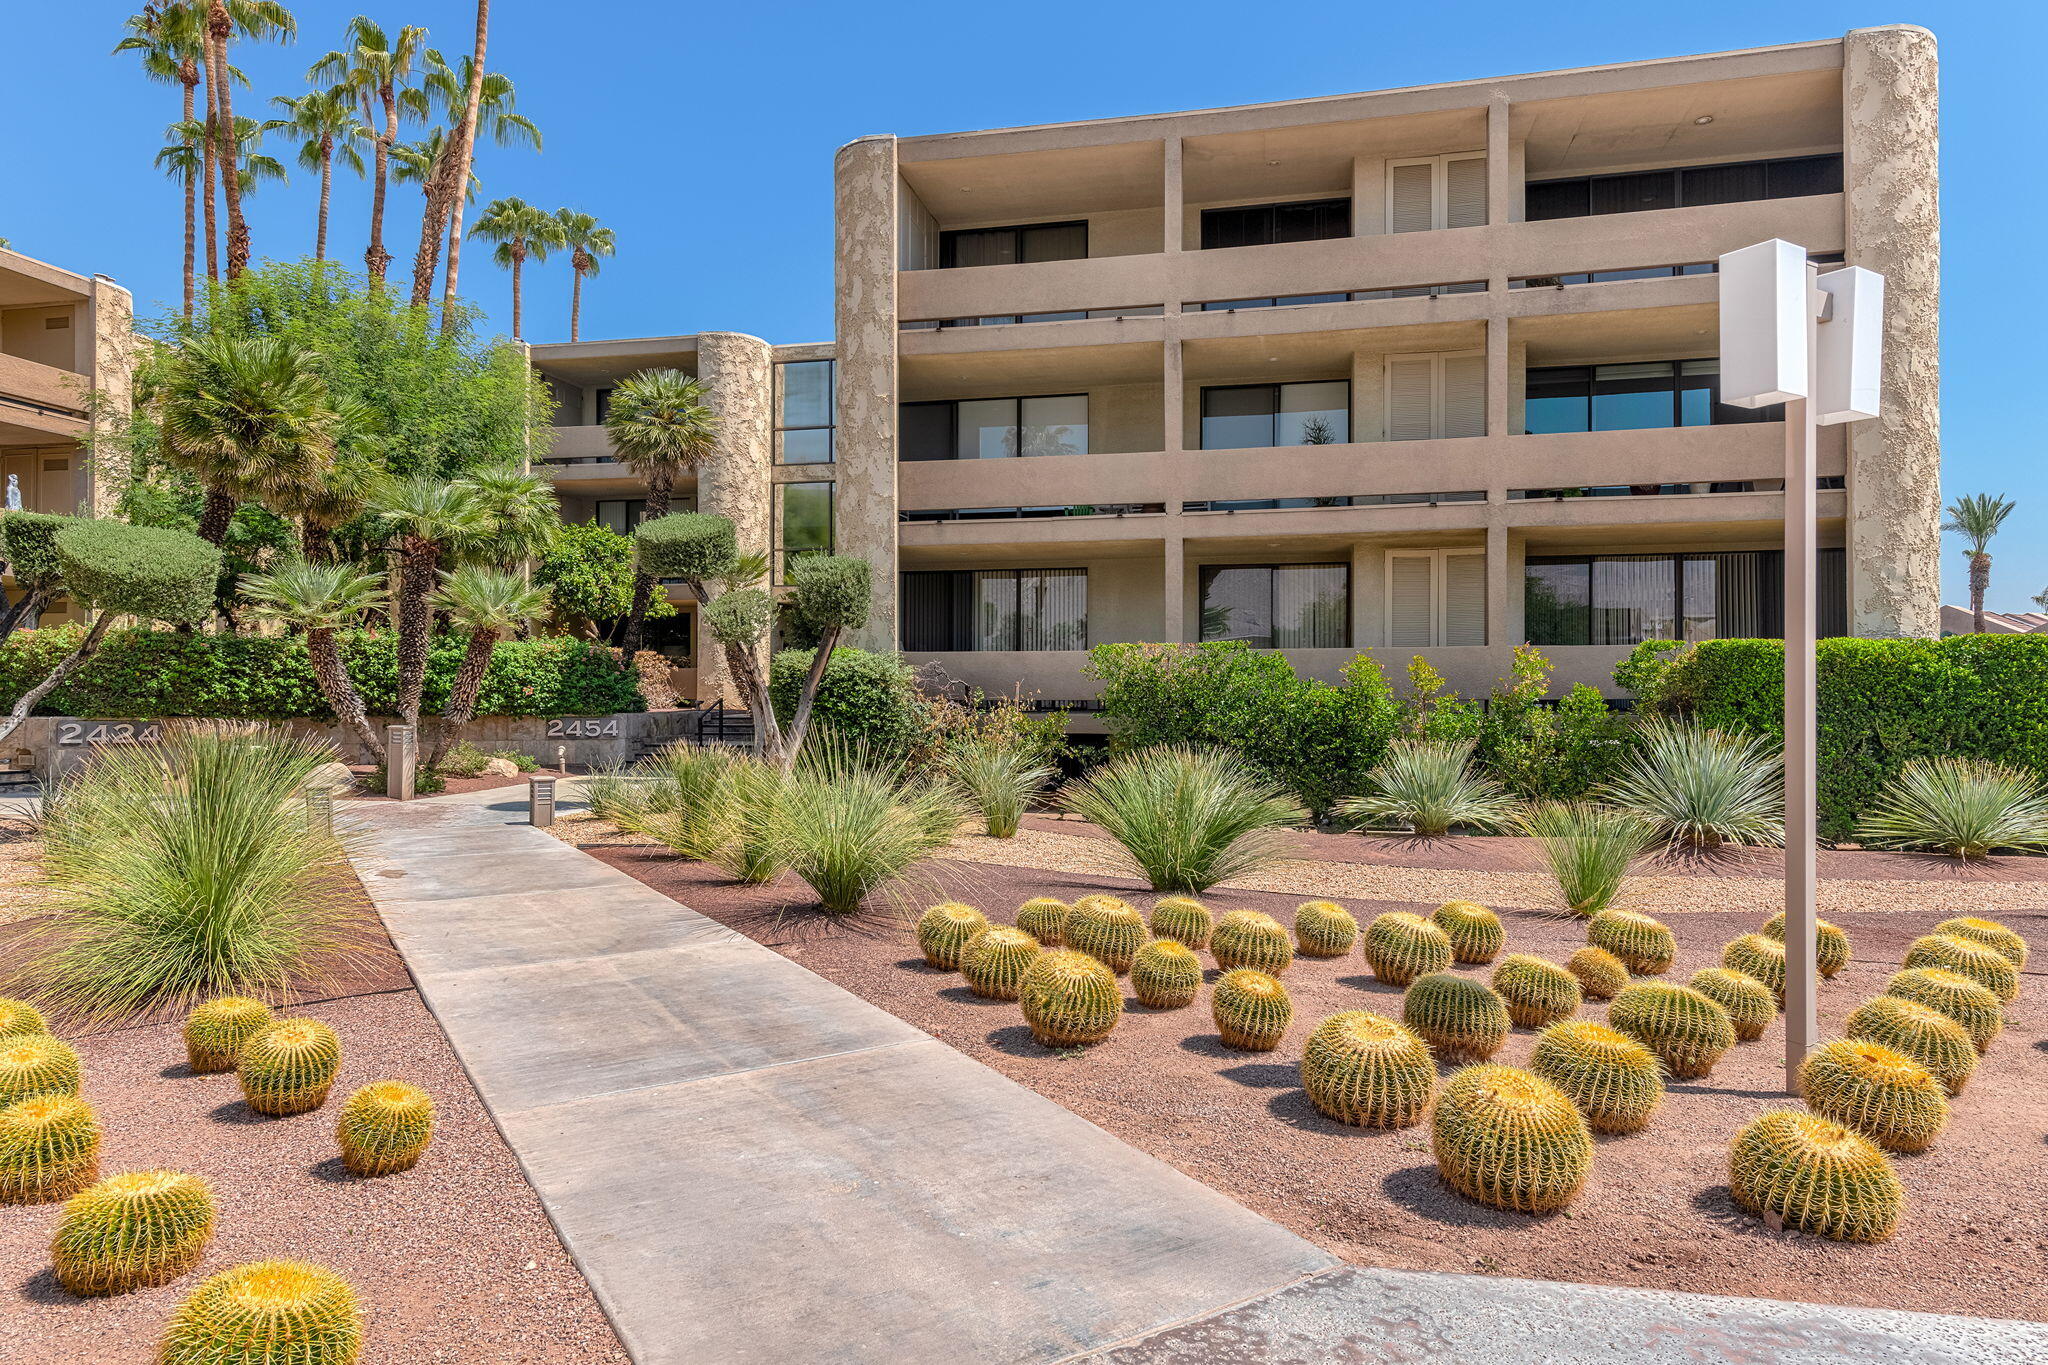 Image 1 for 2454 Palm Canyon DR #3b